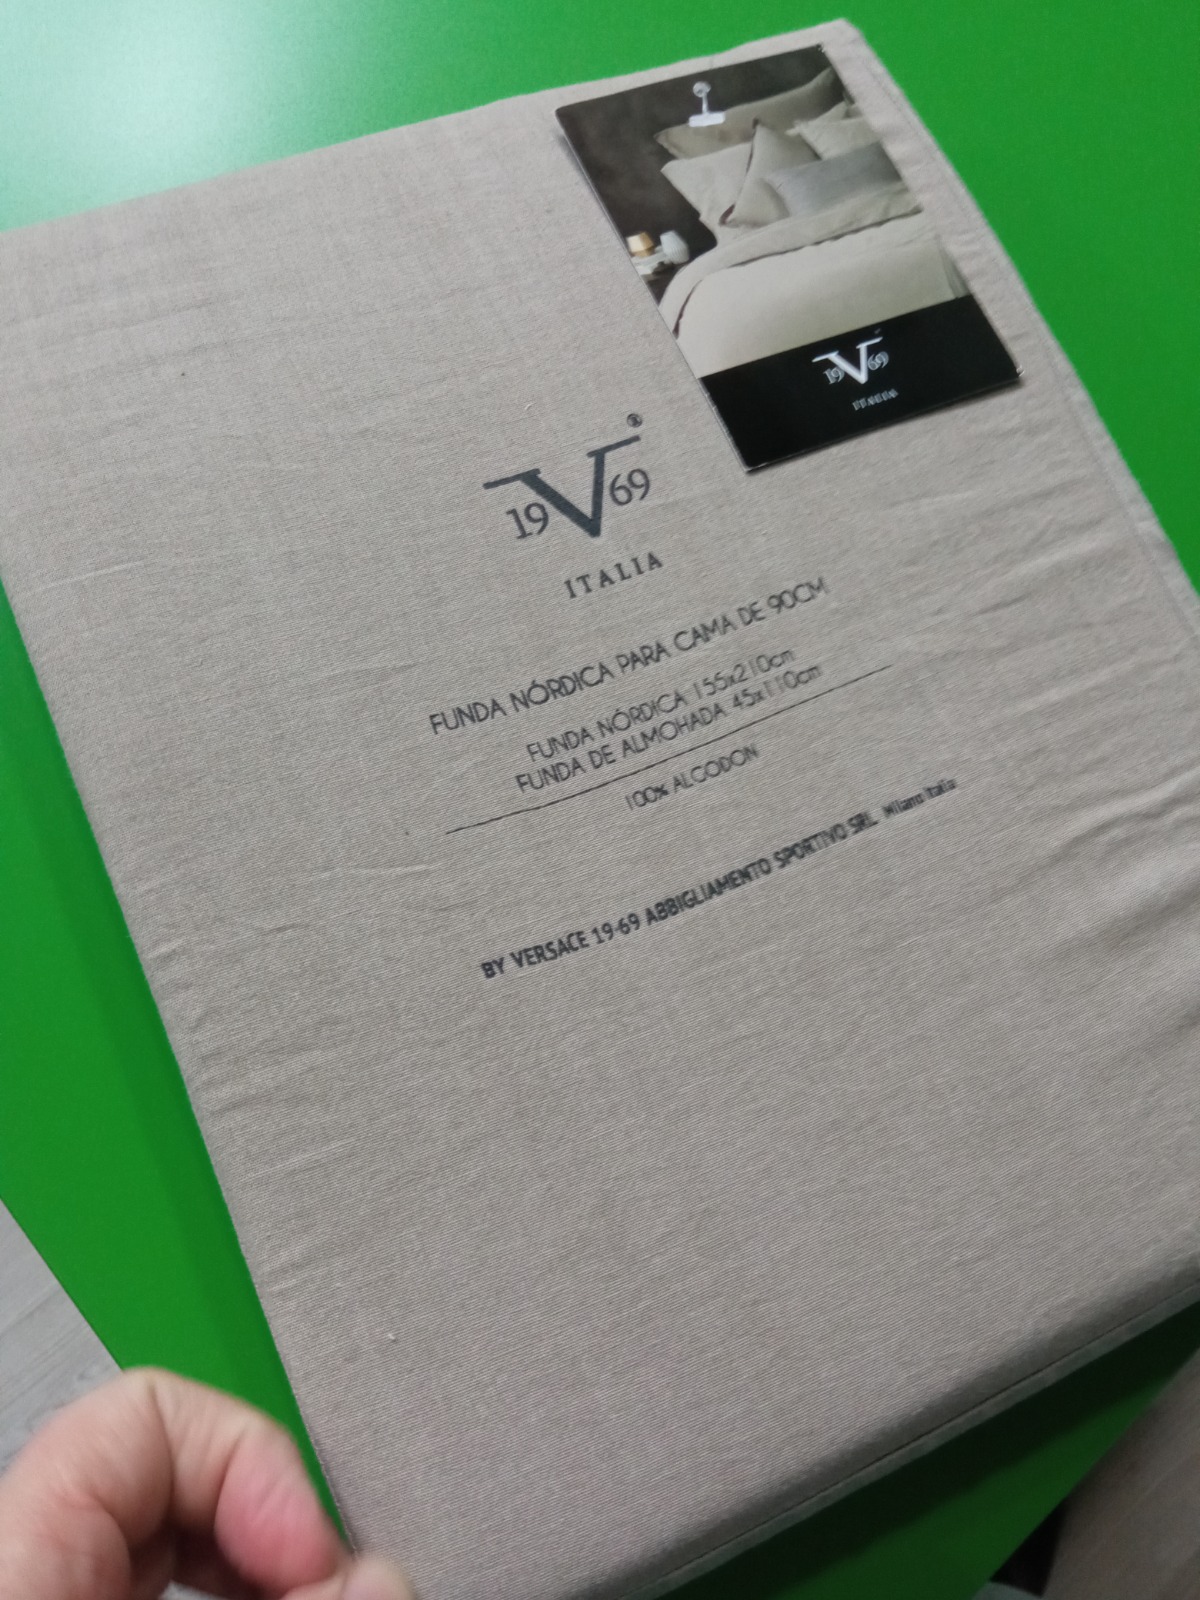 46686 - Bed sheets designed by VERSACE 19-69 Europe